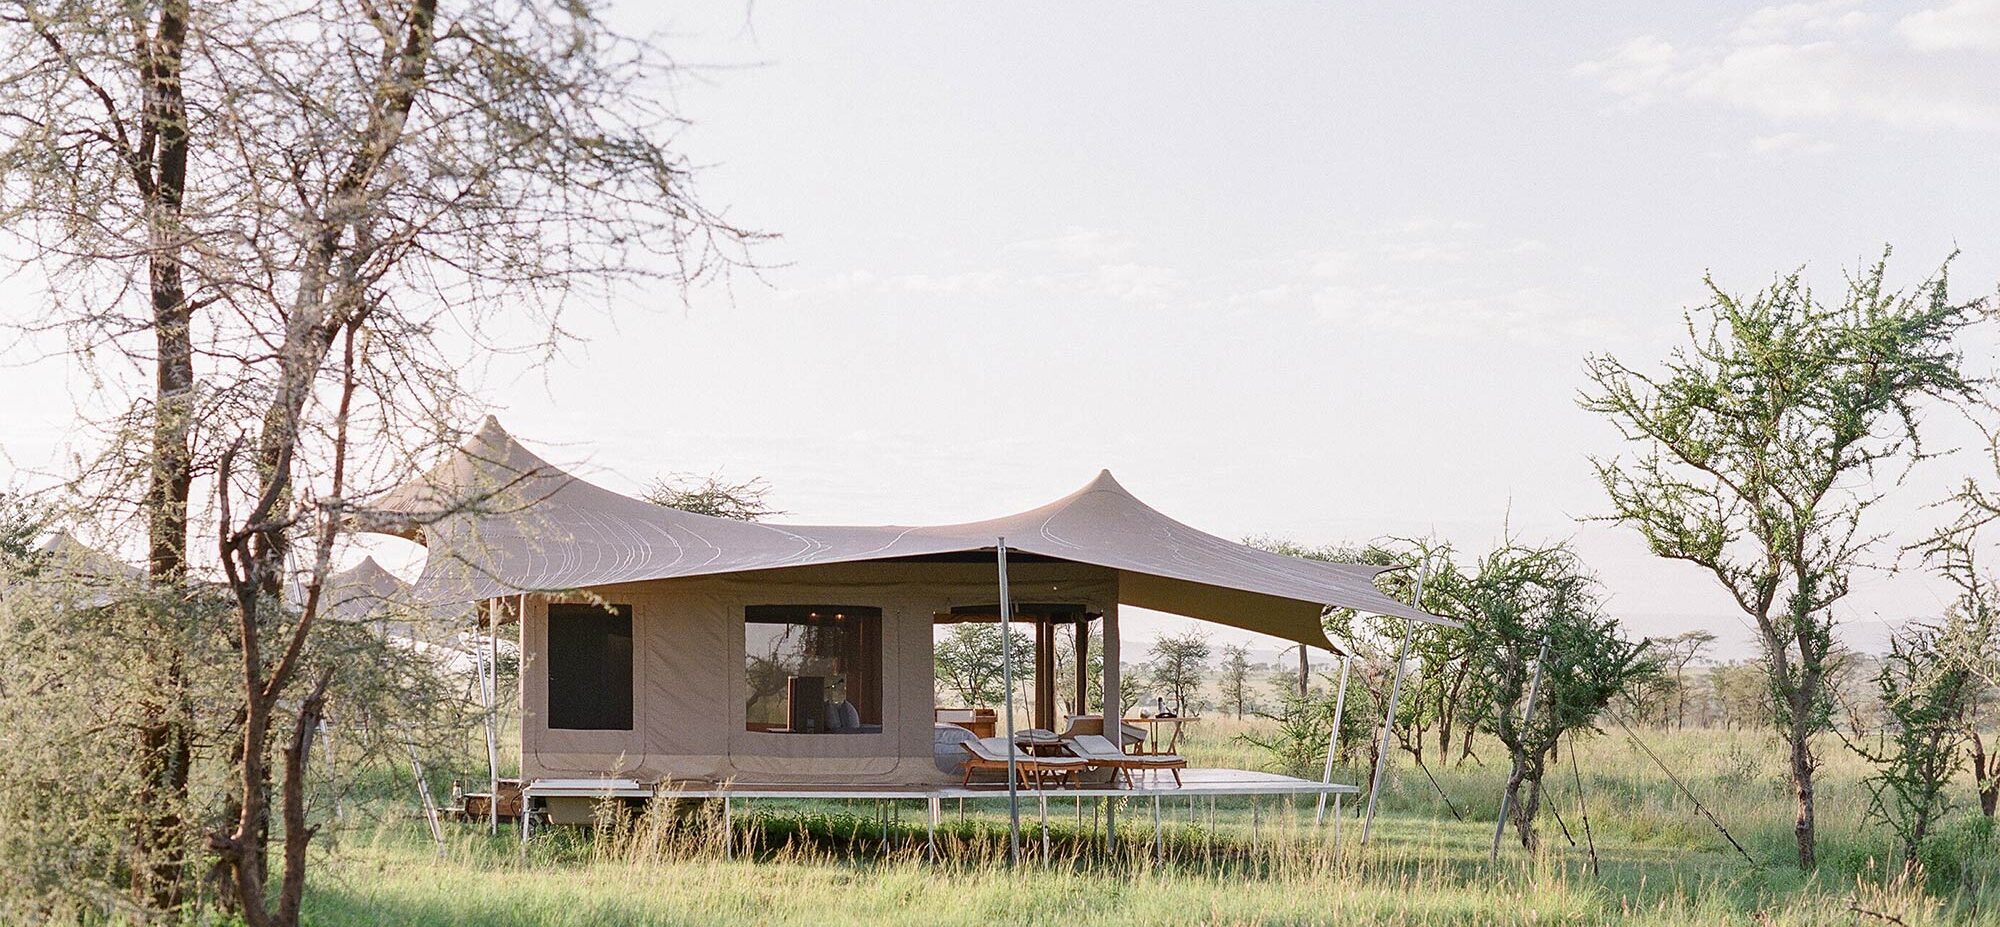 An exterior view of the the Roving Tent in the Serengeti